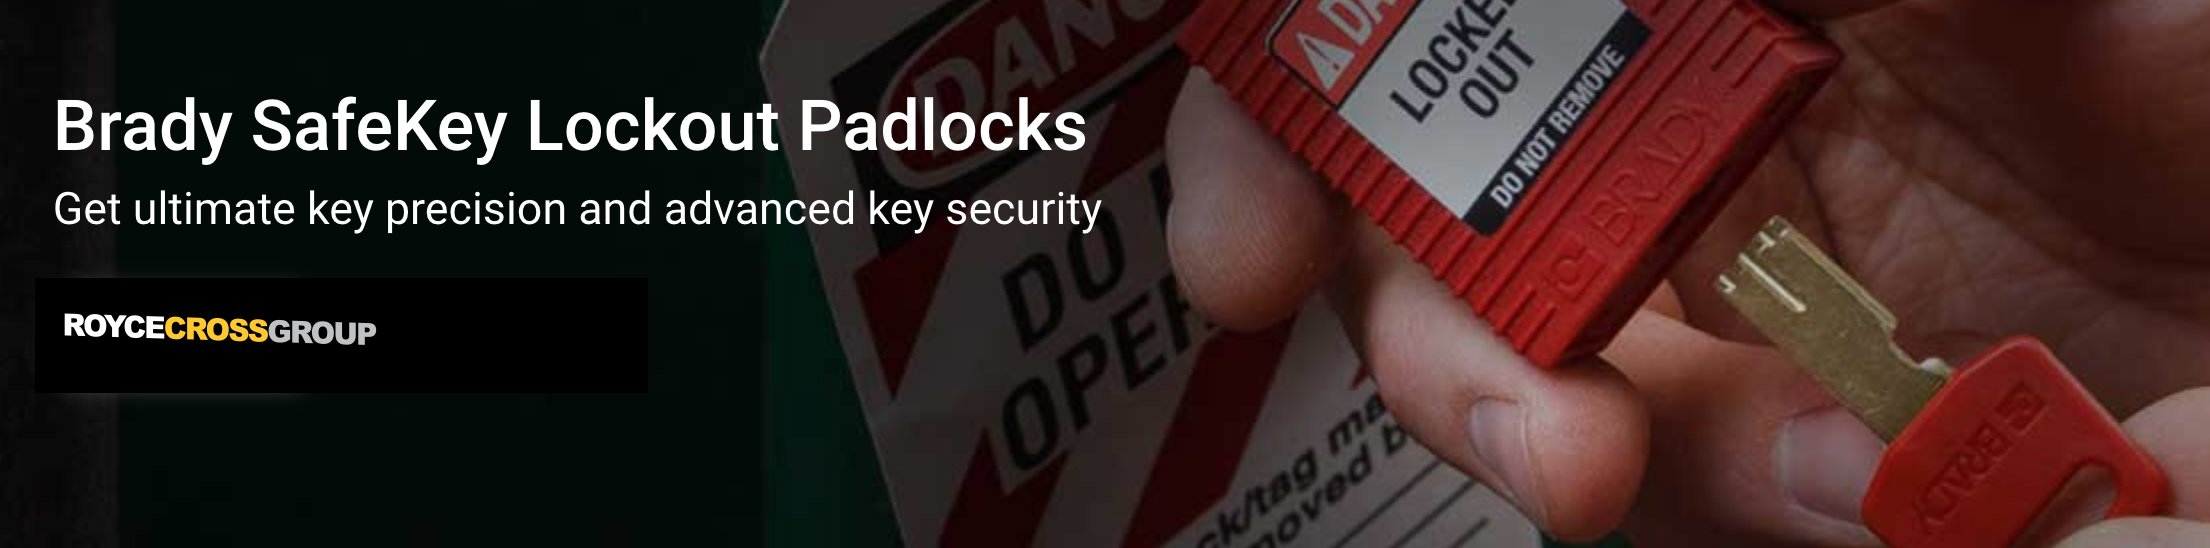 Precision and control in lockout padlocks